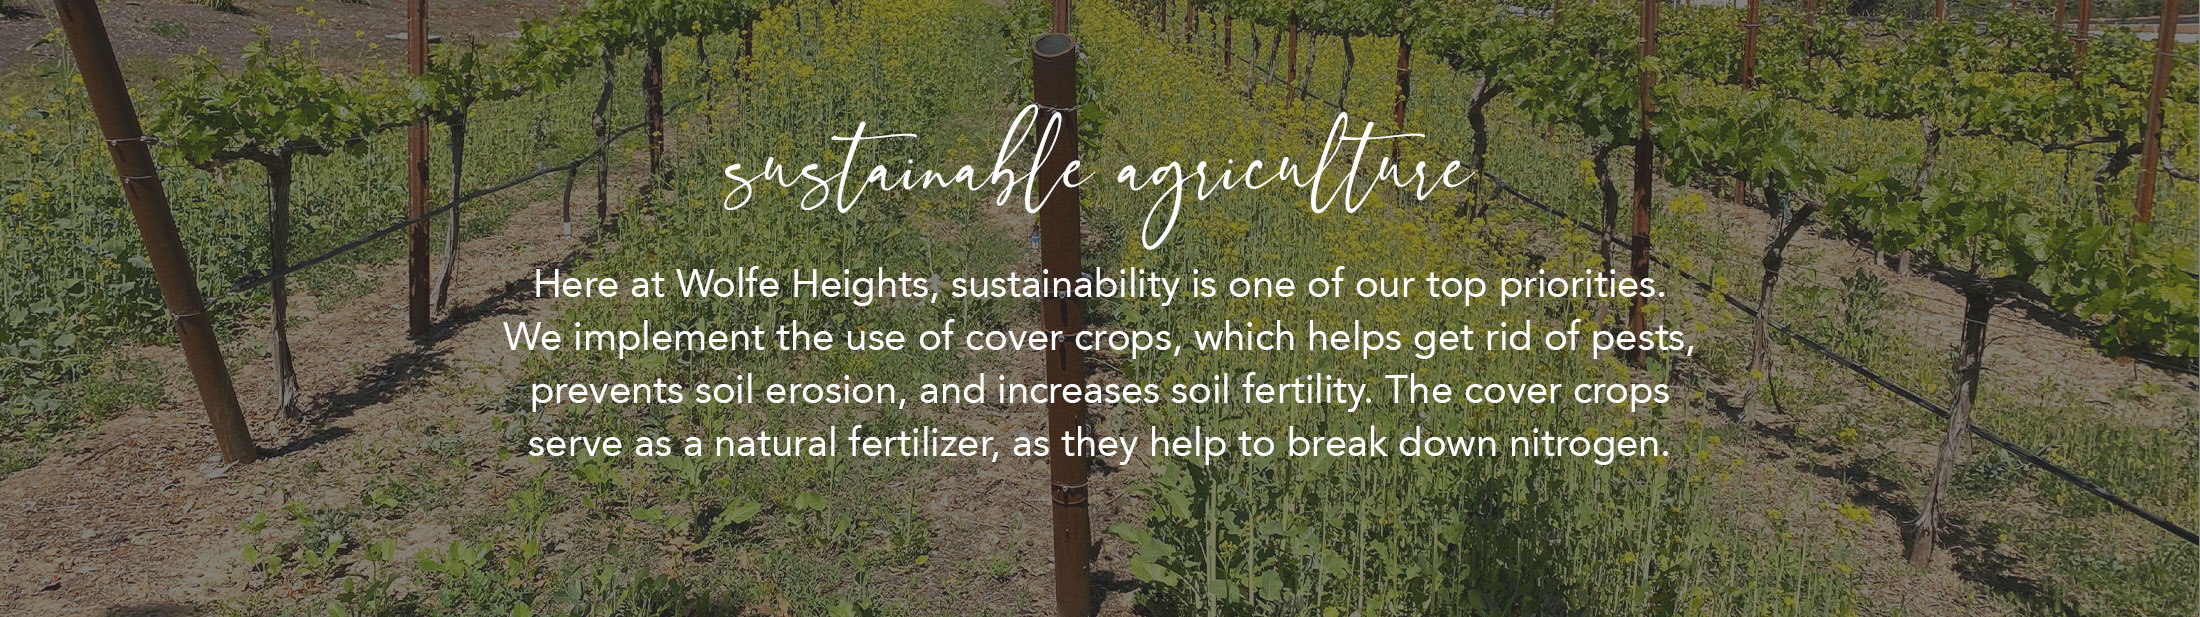 Sustainable Agriculture at Wolfe Heights Estates